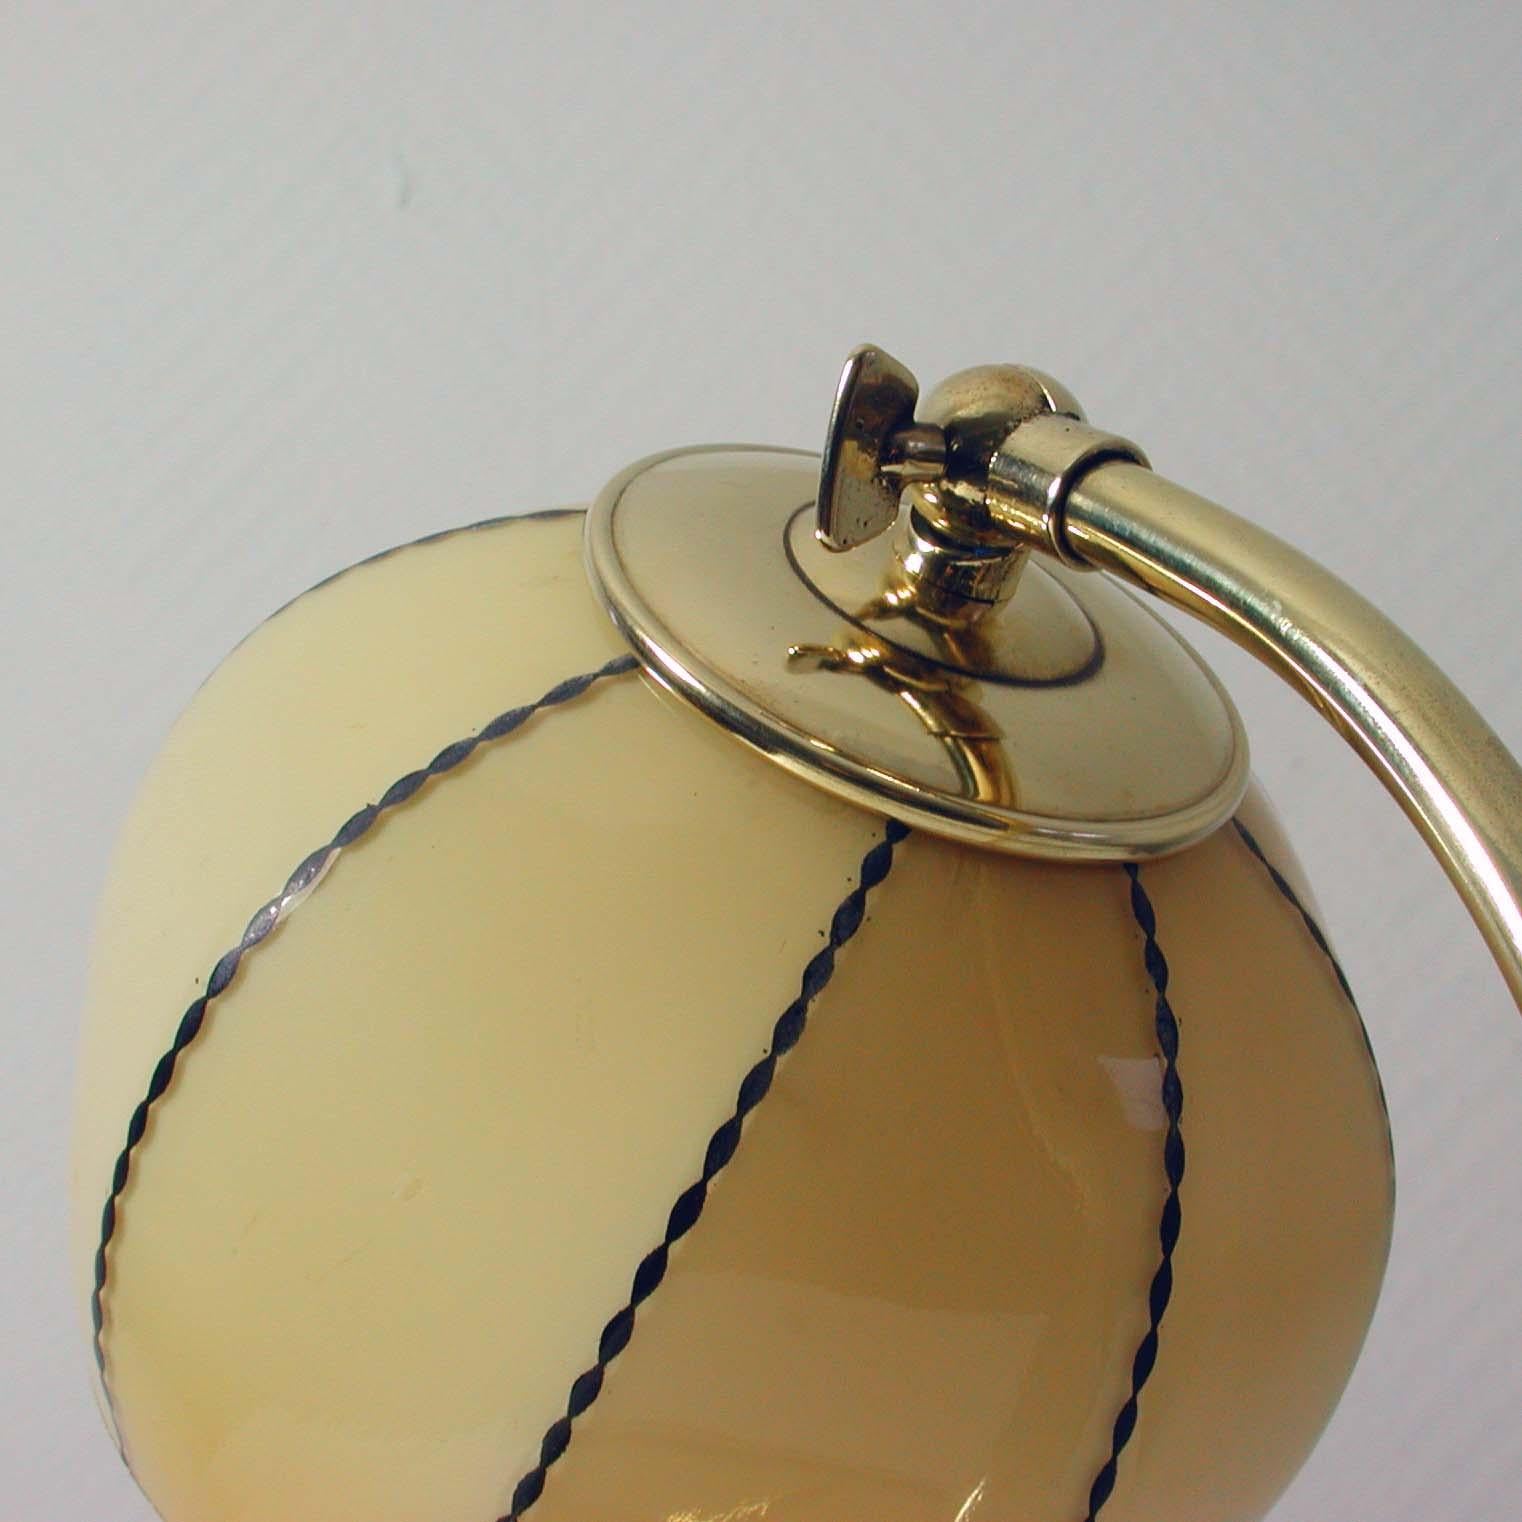 Vintage 1930s German Bauhaus Art Deco Brass and Opal Table Lamp Sconce (Messing)